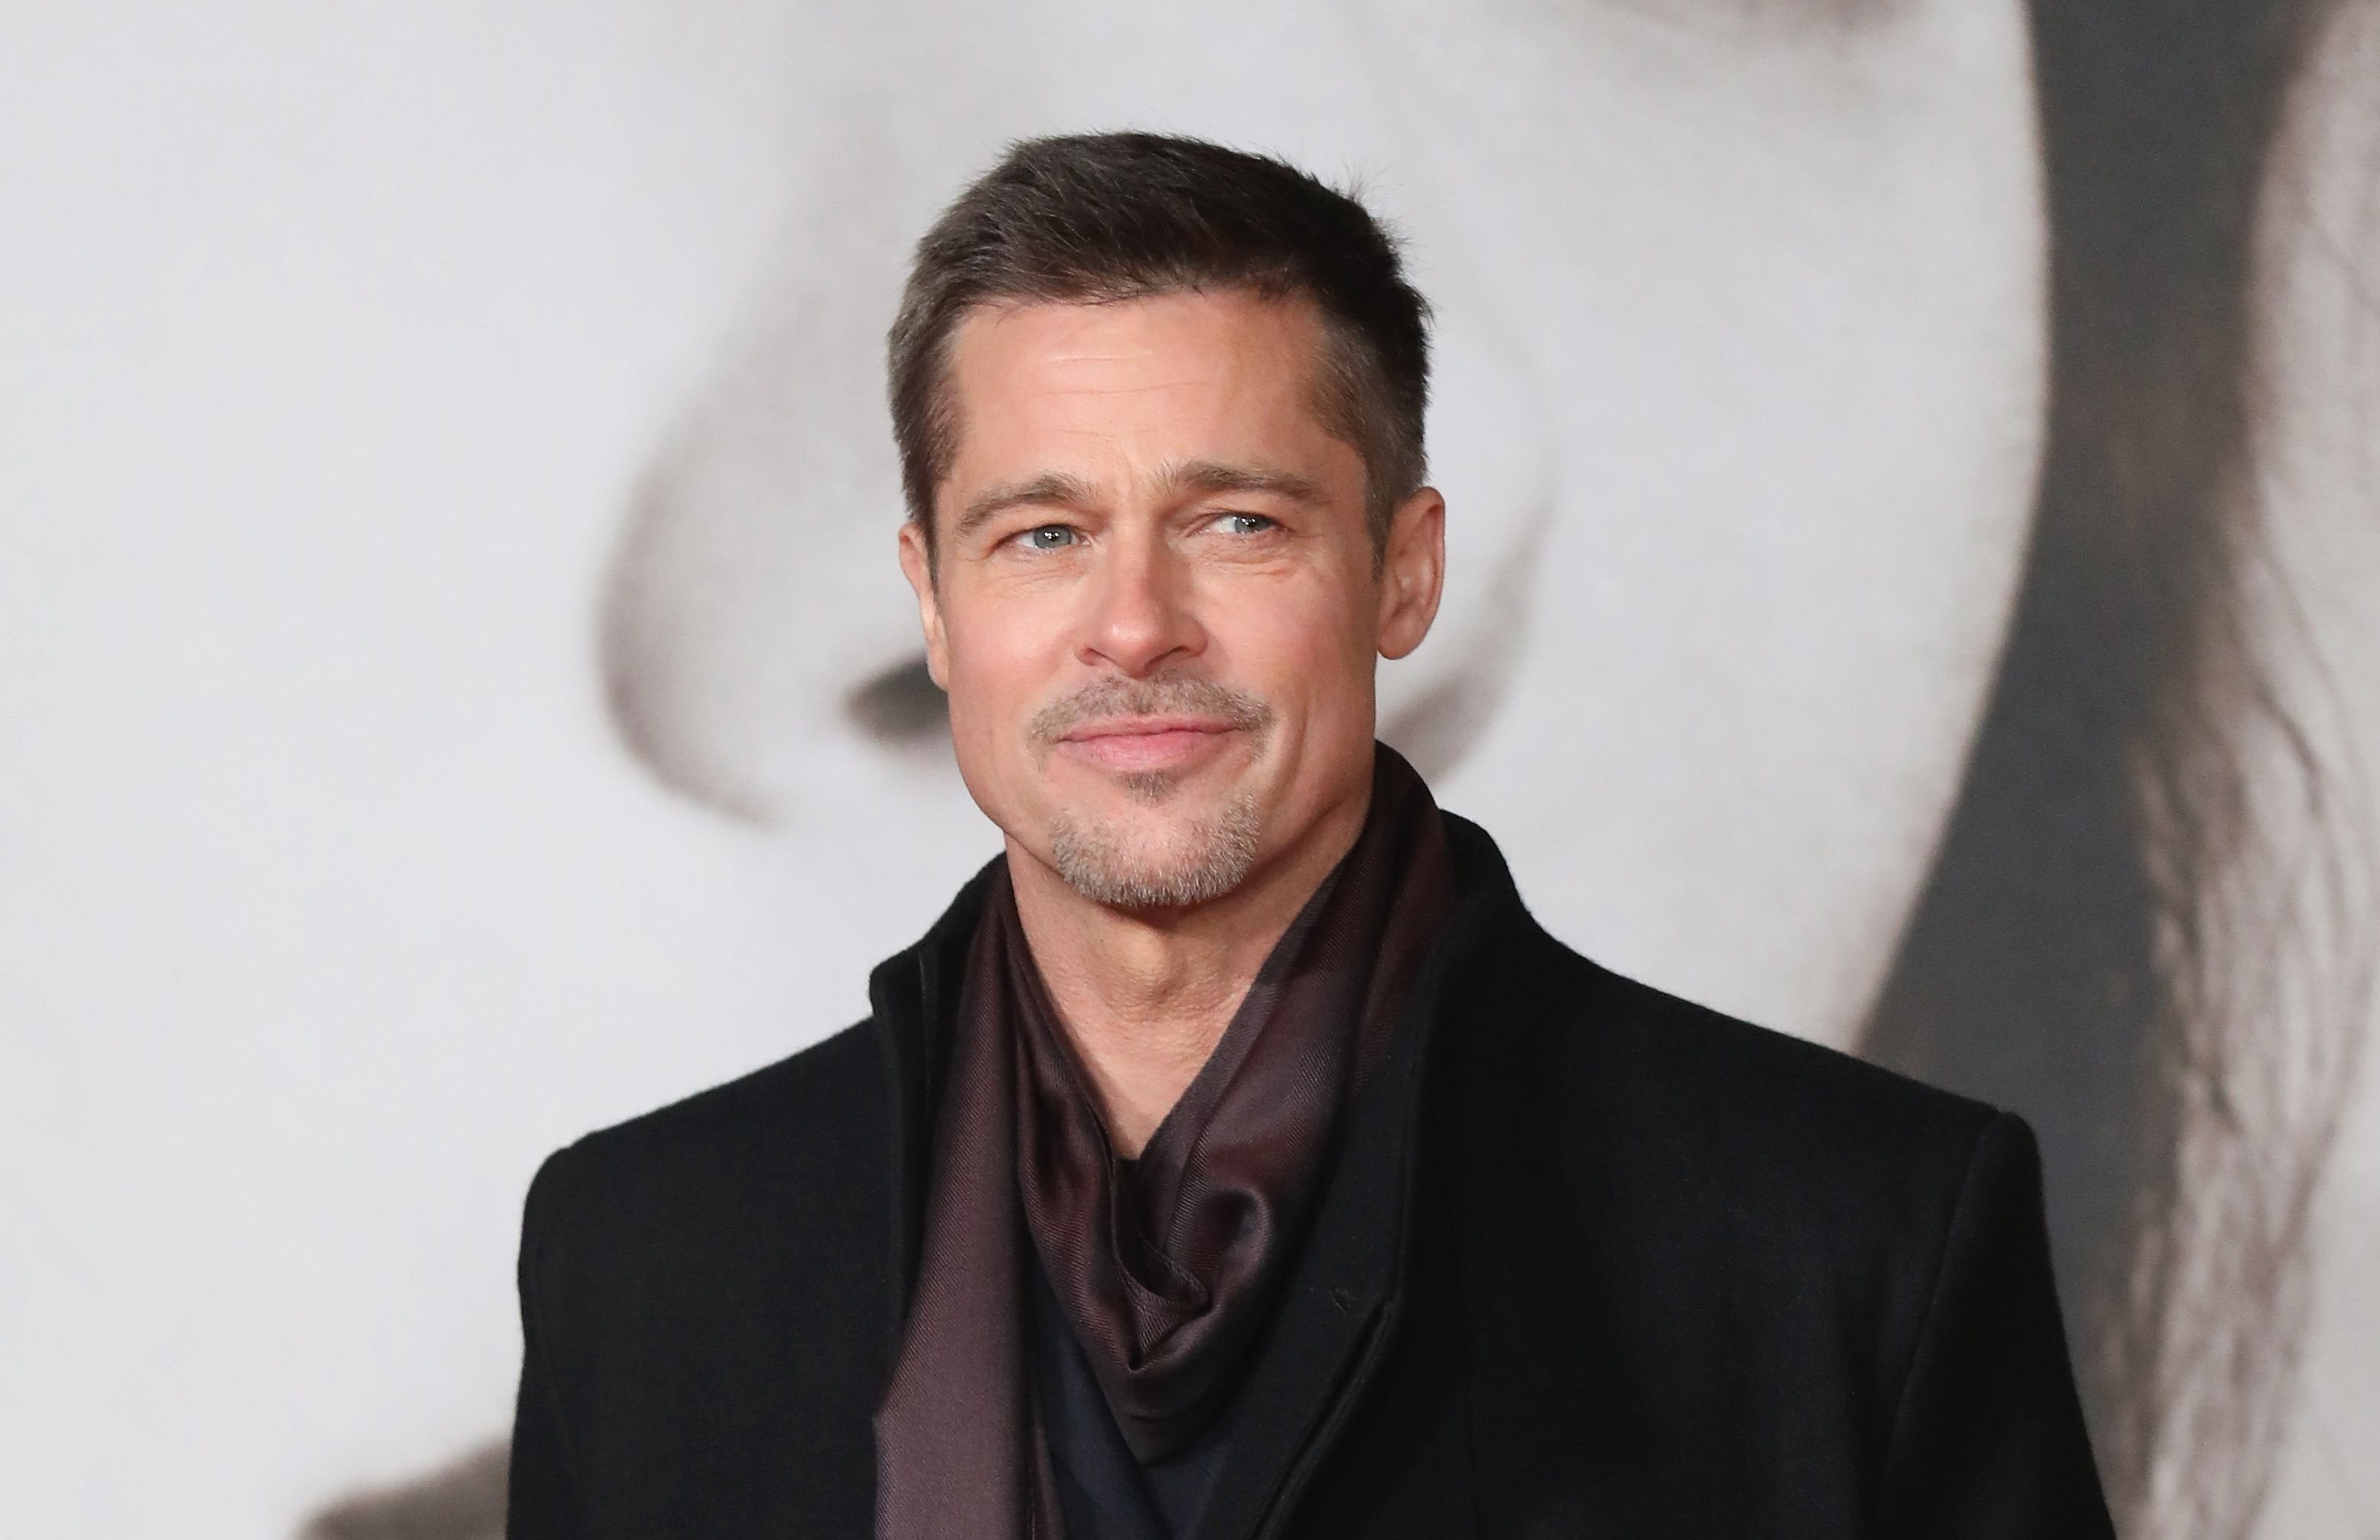 Brad Pitt at the UK Premiere of "Allied" at Odeon Leicester Square on November 21, 2016 | Photo: Getty Images